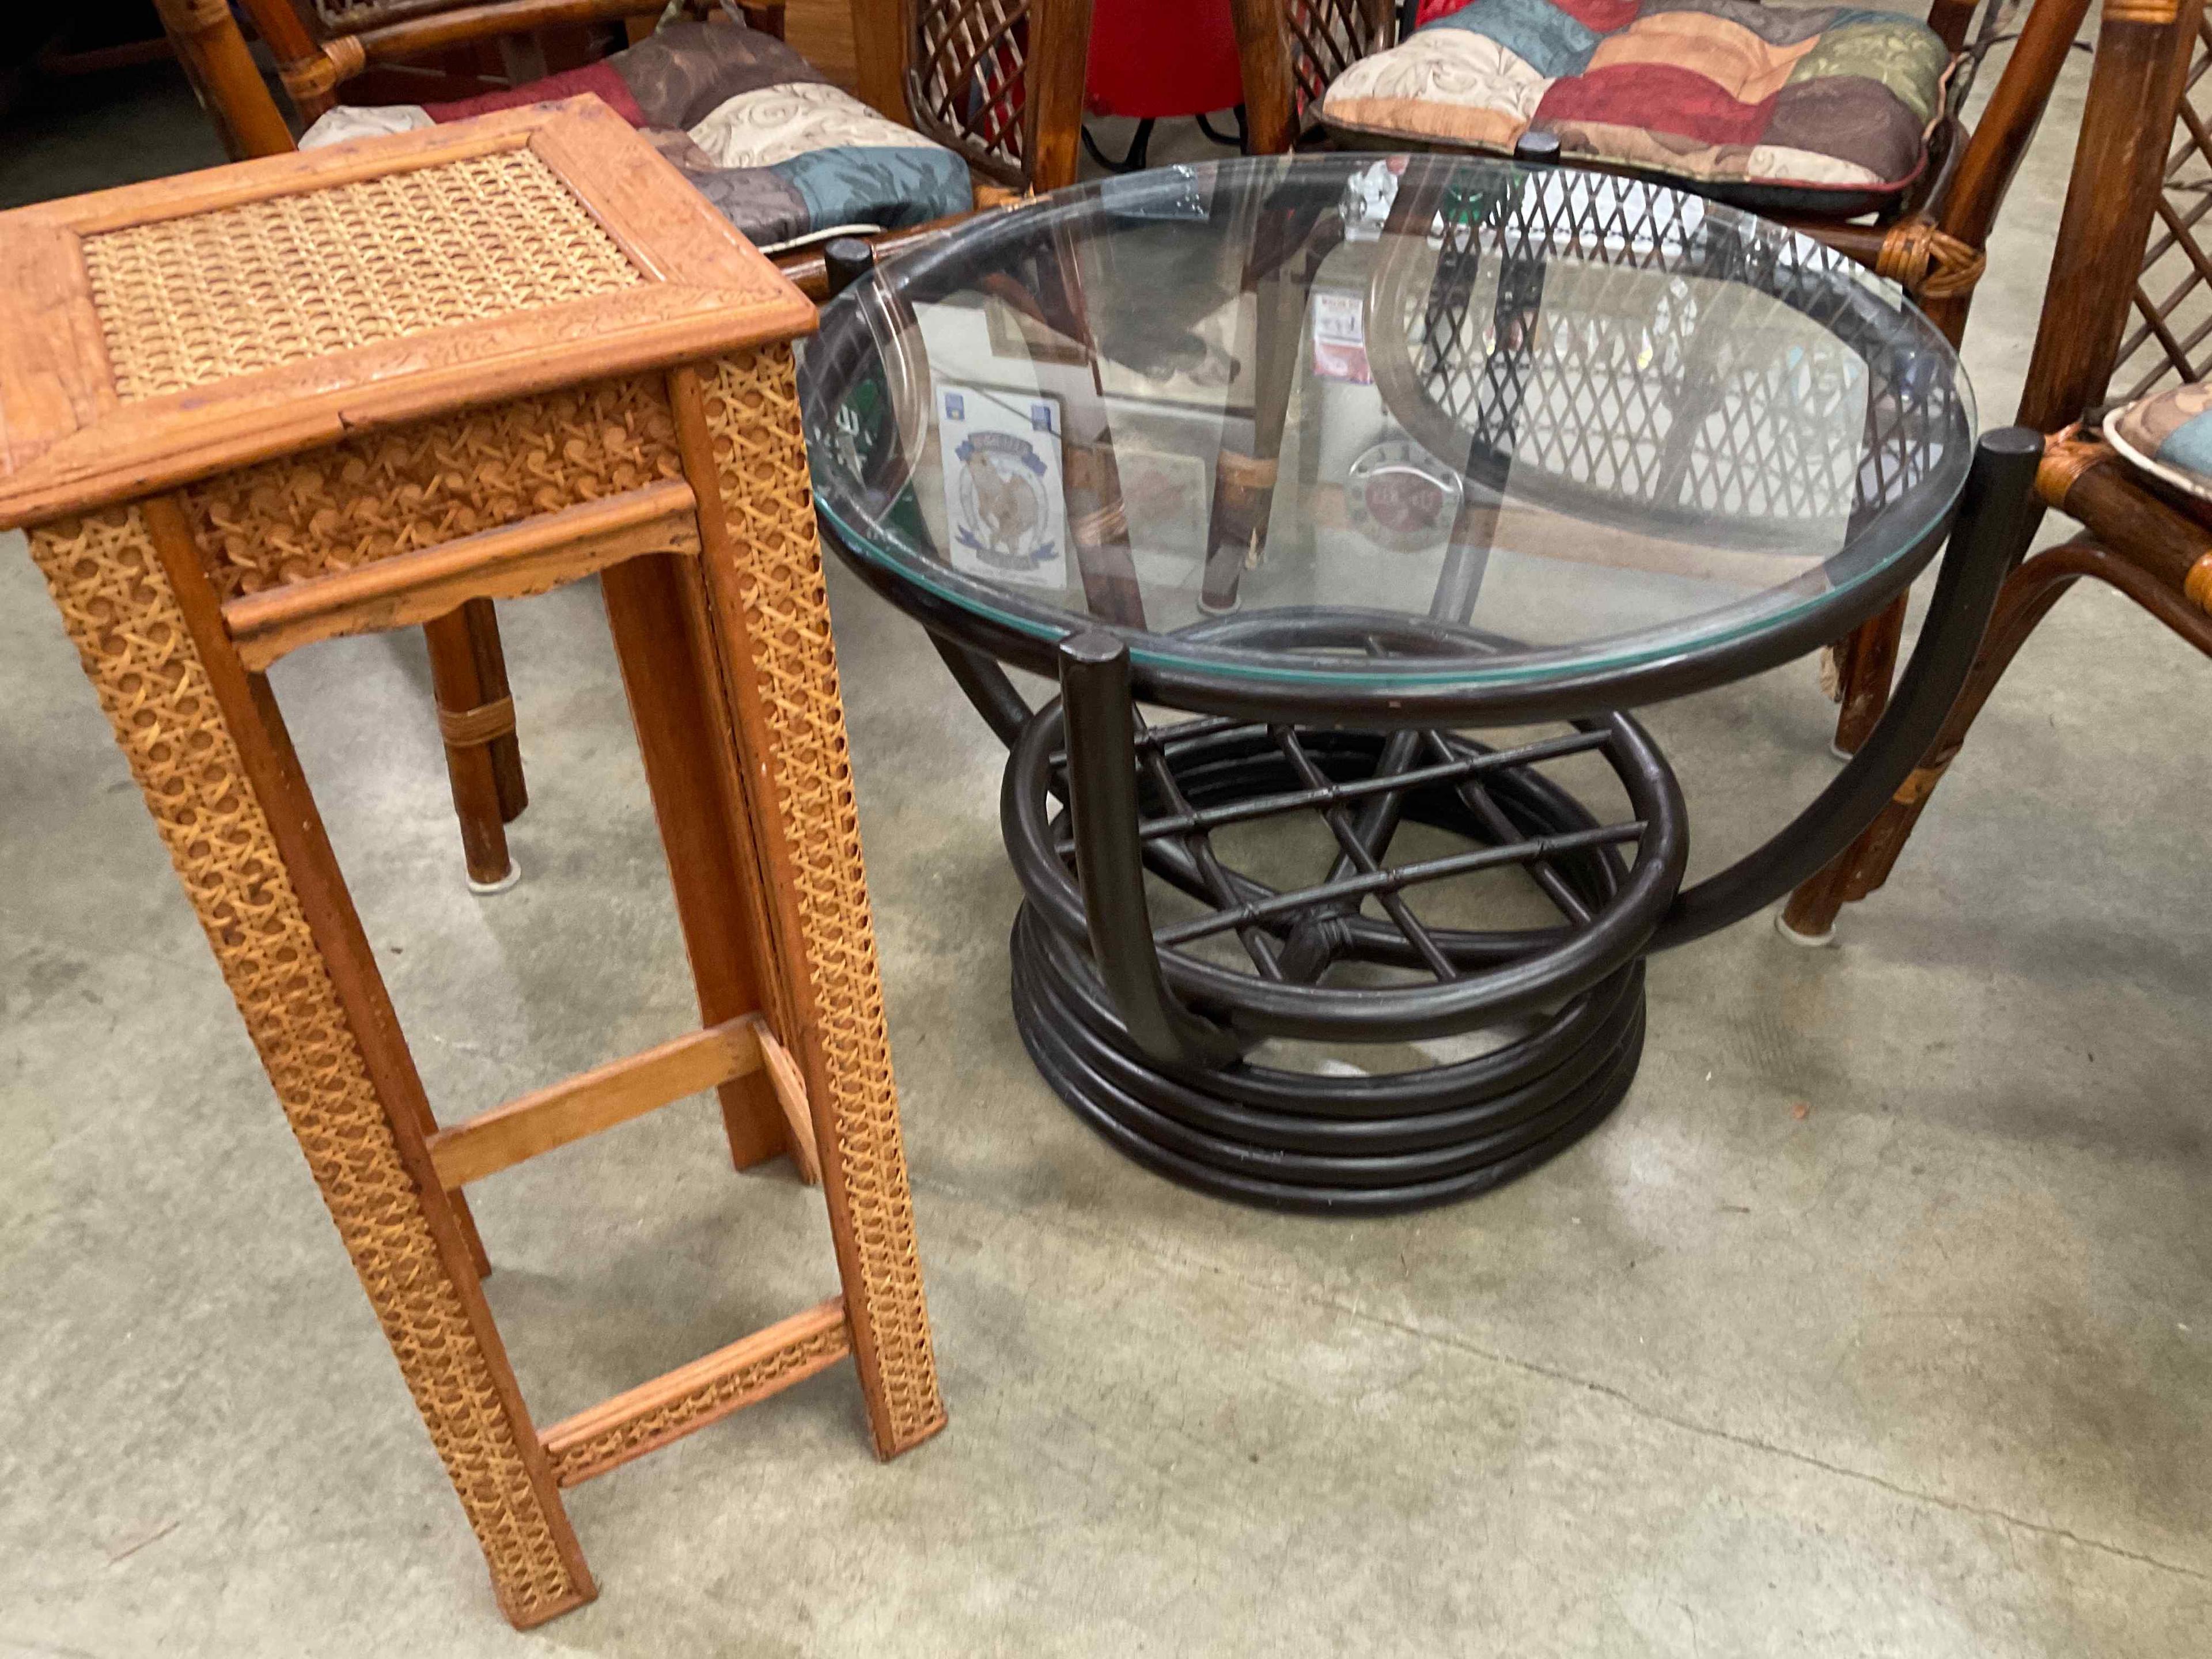 Three Rattan Chairs, Round Table, Plant Stand